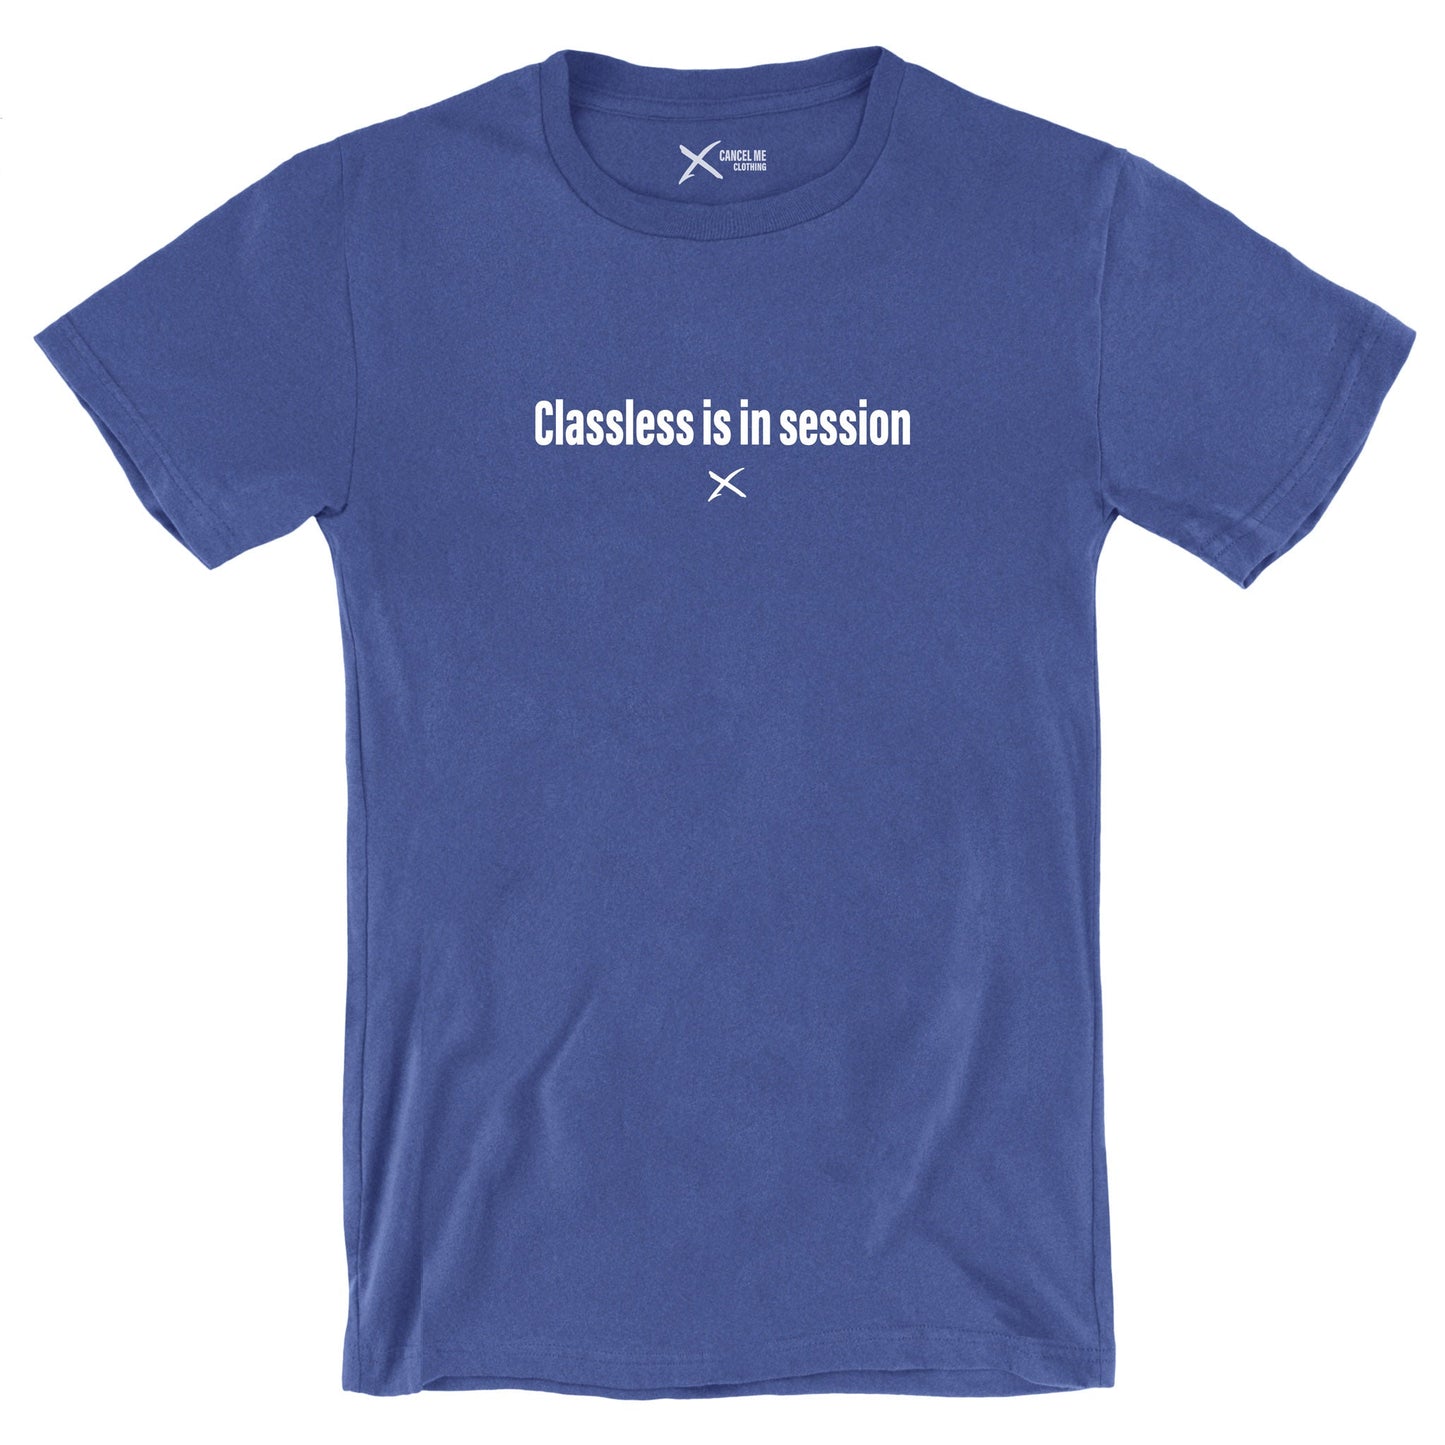 Classless is in session - Shirt